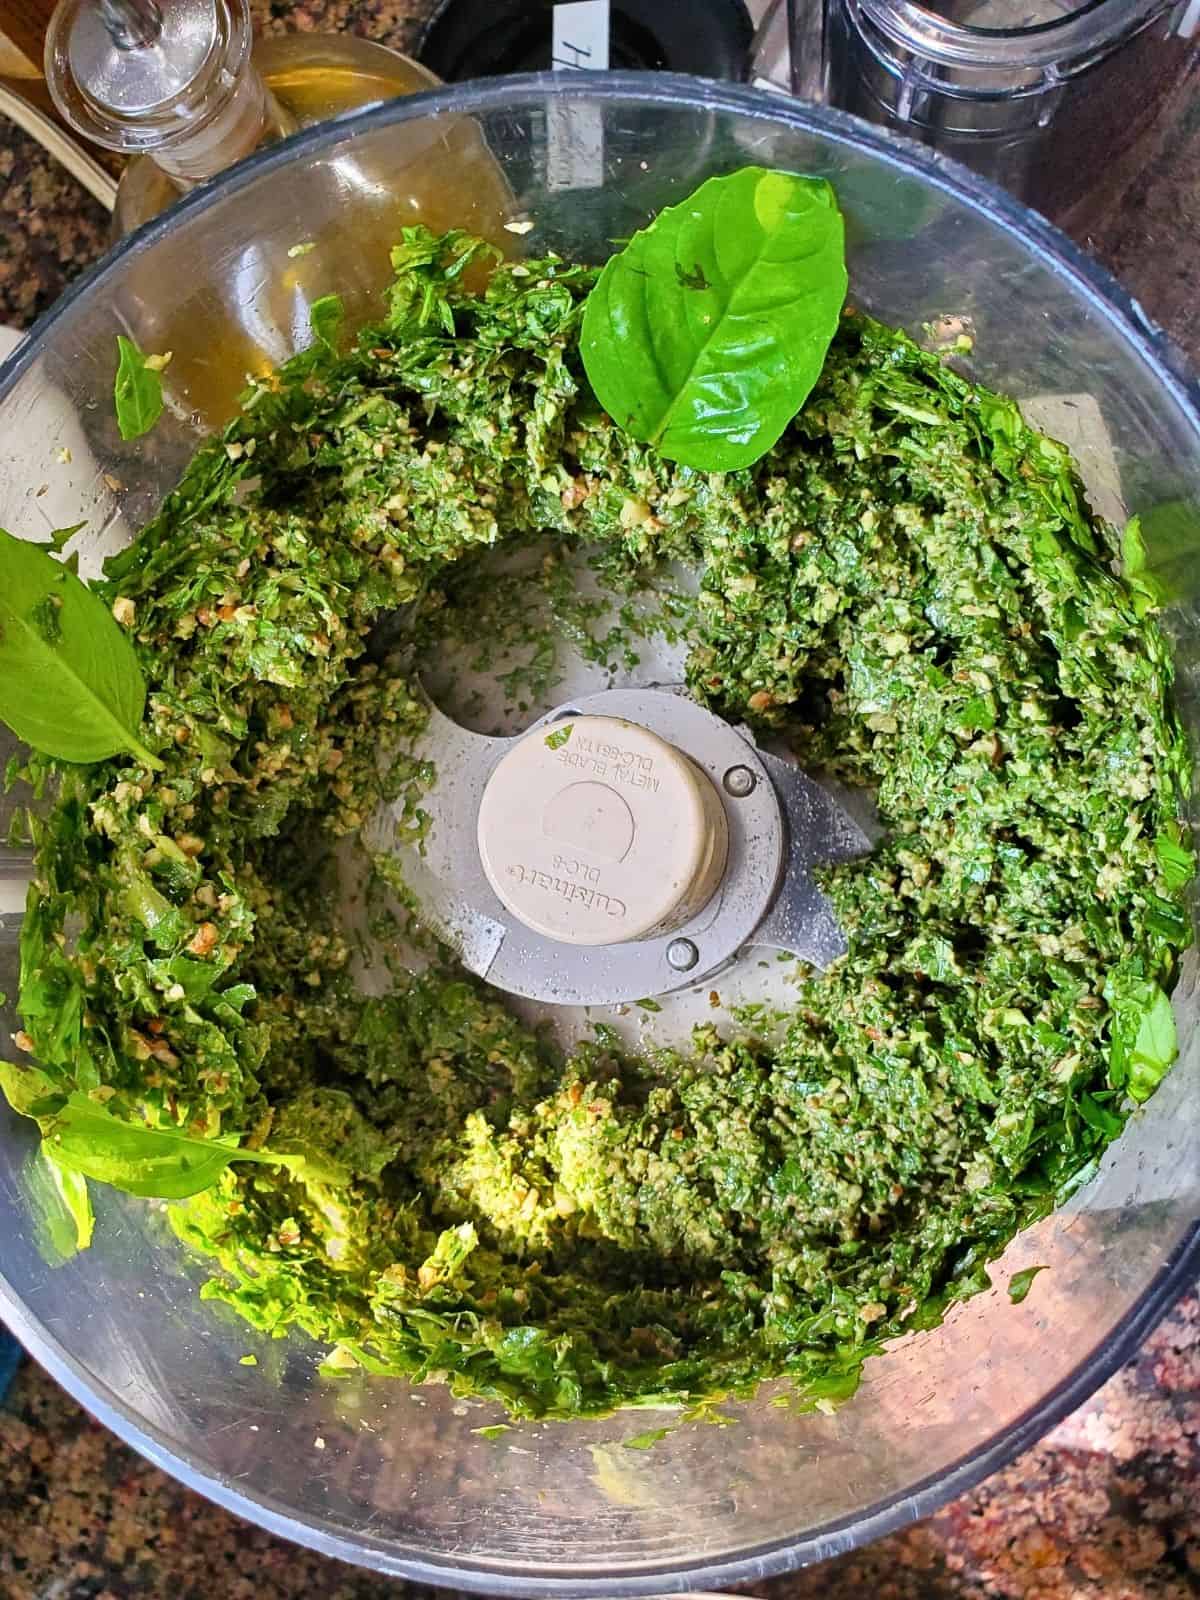 a blend of basil, garlic, and nuts in a food processor.